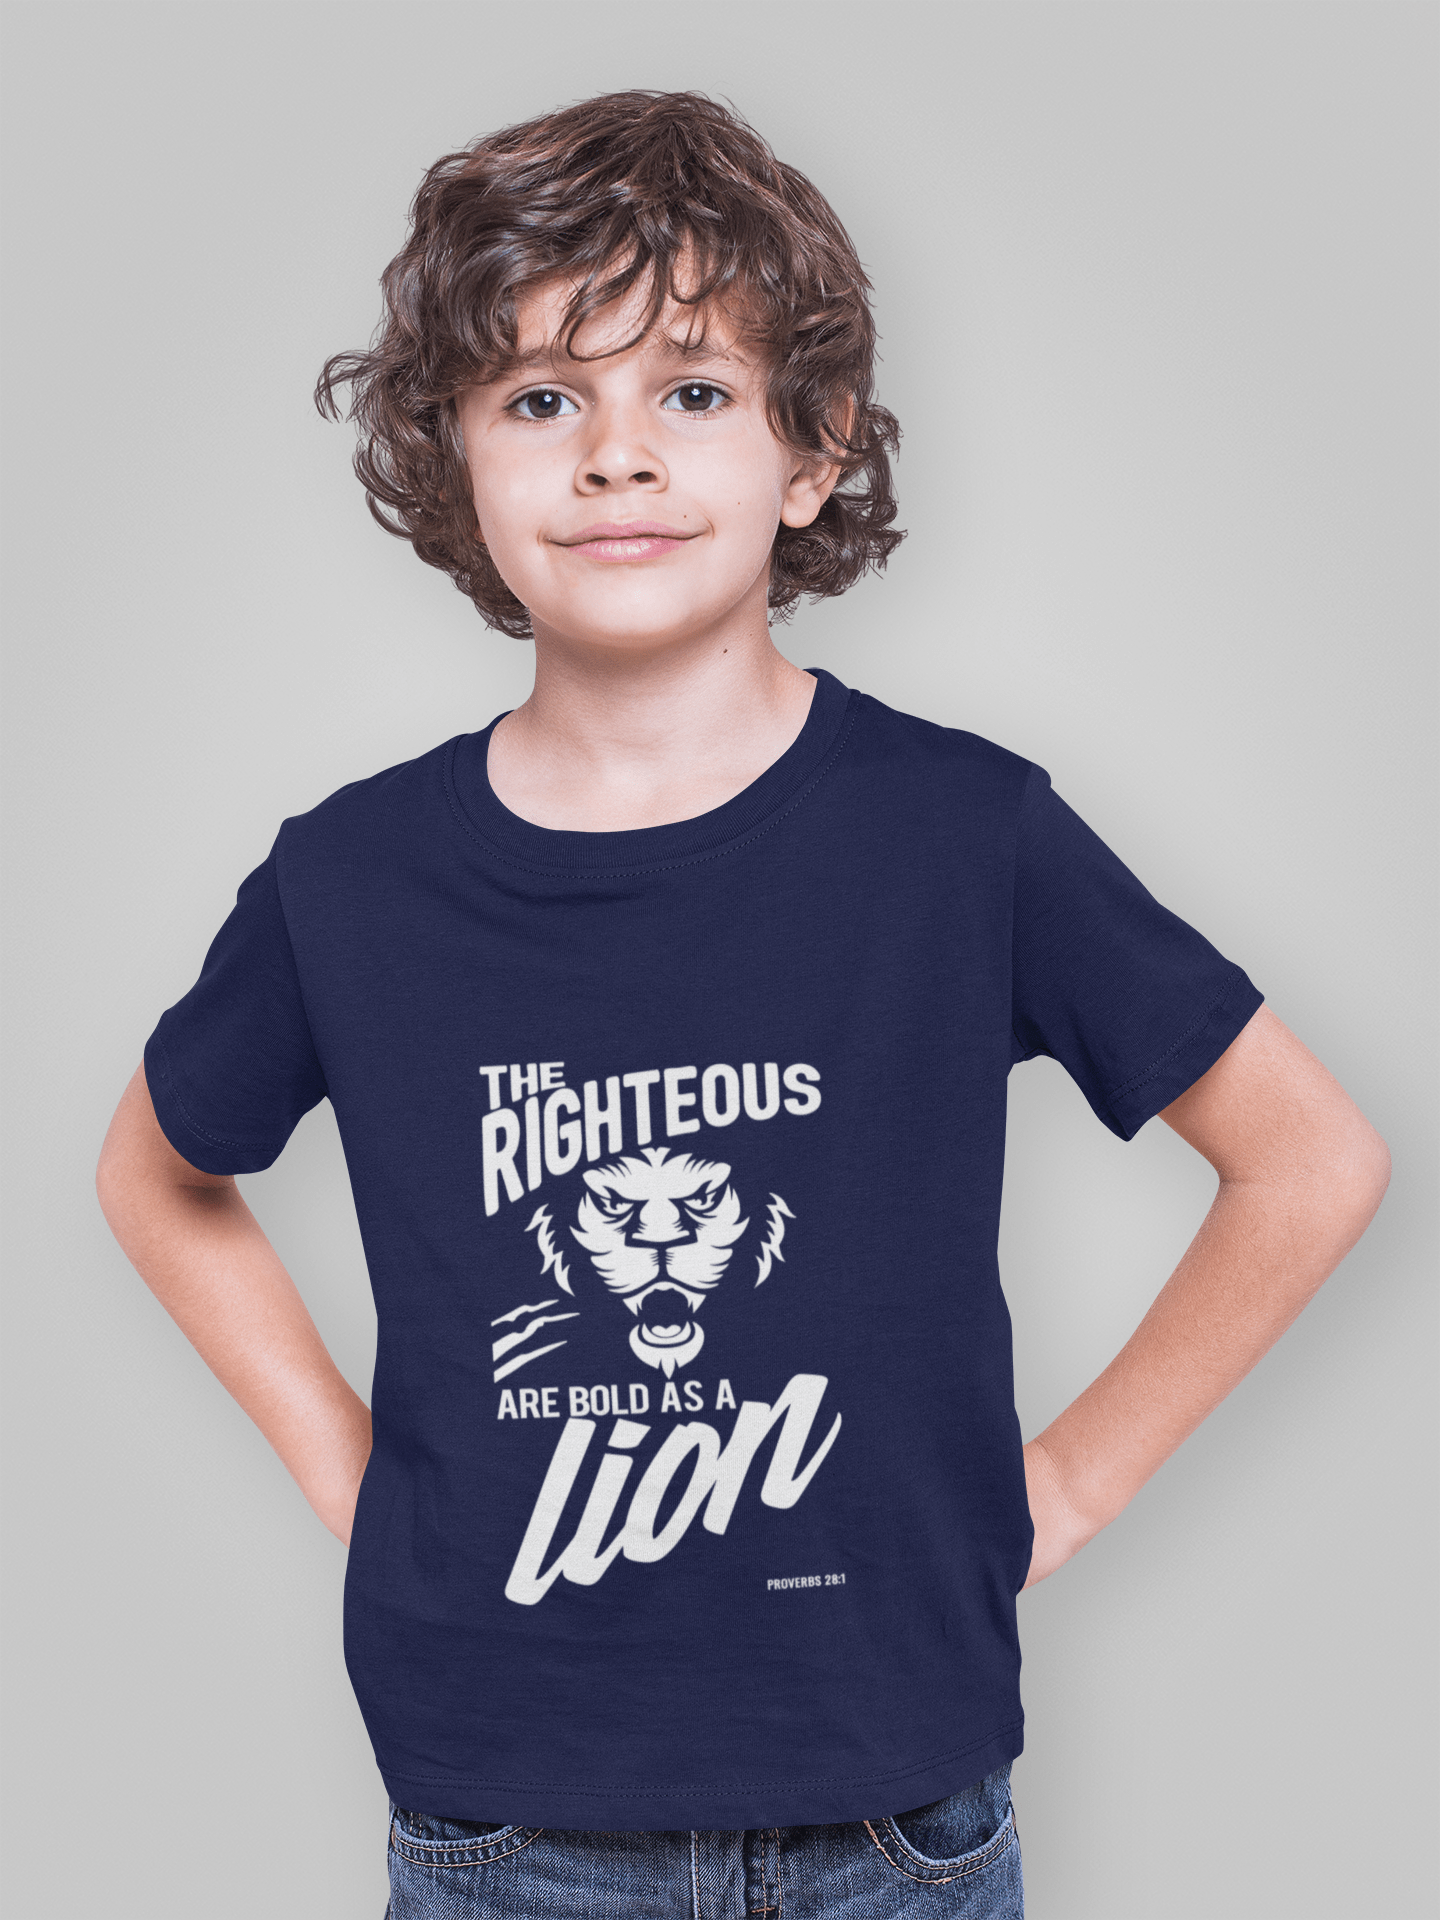 Living Words Boy Round neck Tshirt 0-12M / Navy Blue THE RIGHTEOUS